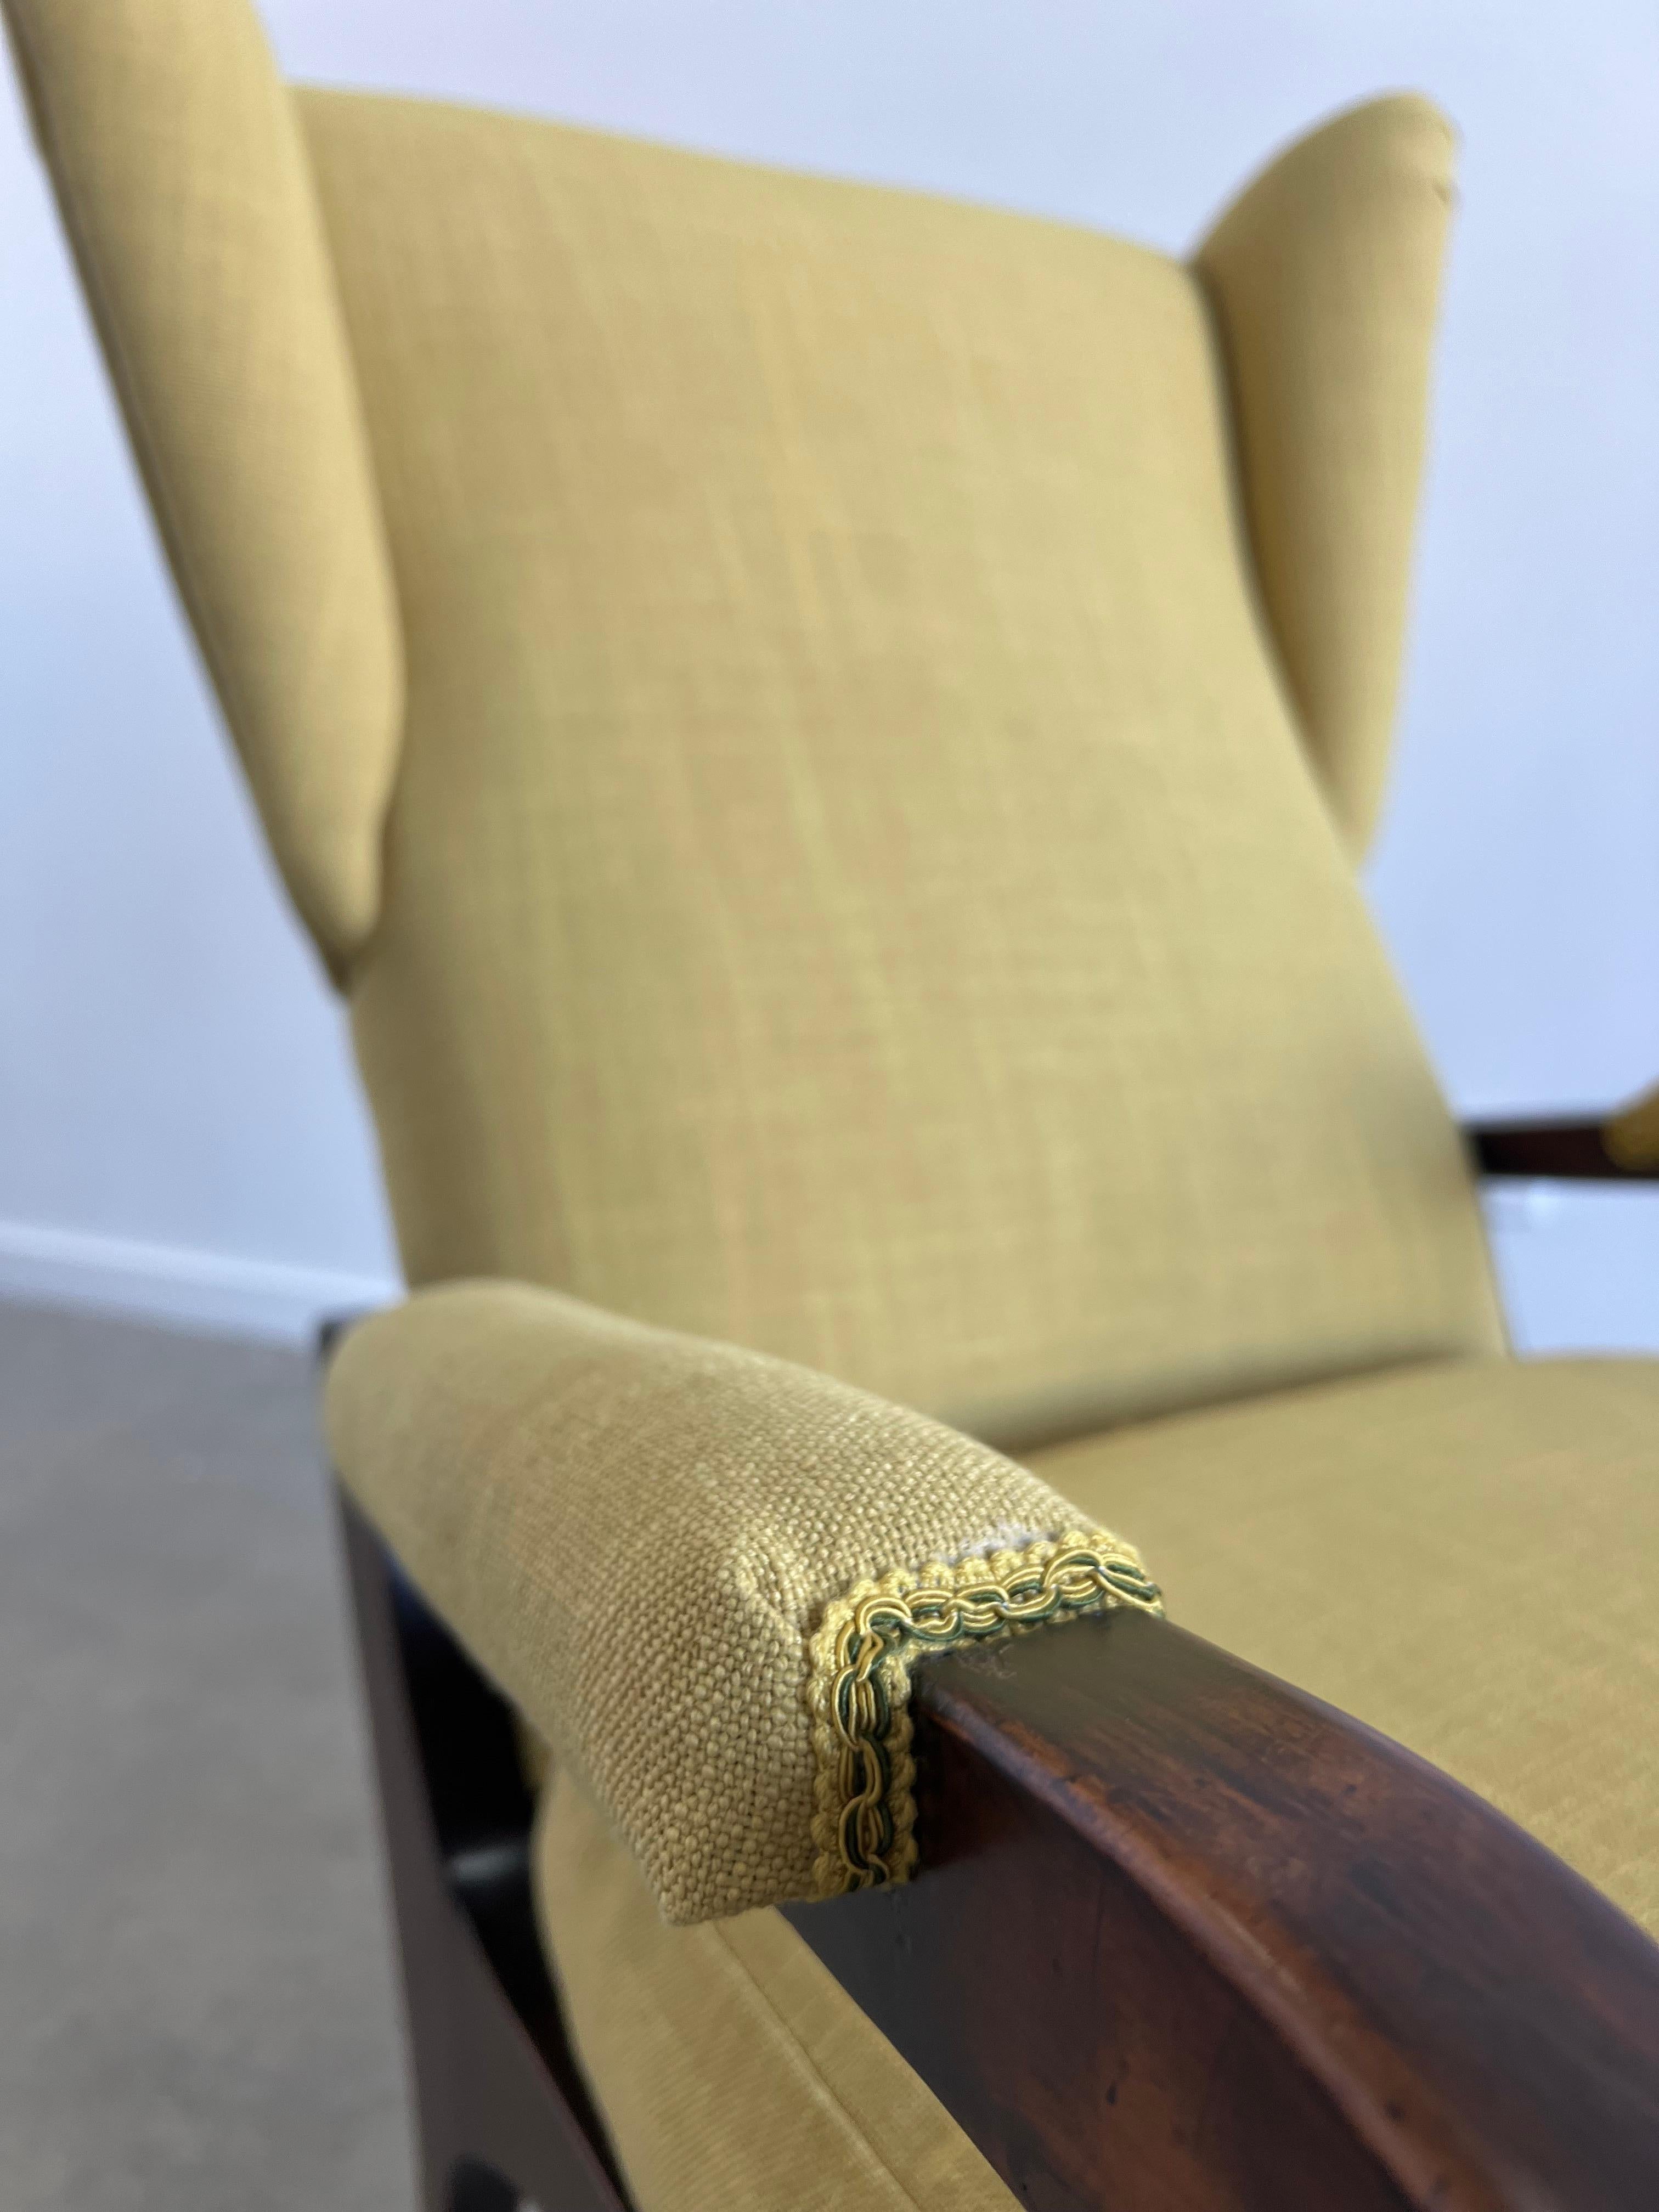 Renzo Franchi for Brianzola Camera Lounge Reclinable Armchair with Ottoman In Excellent Condition For Sale In Byron Bay, NSW